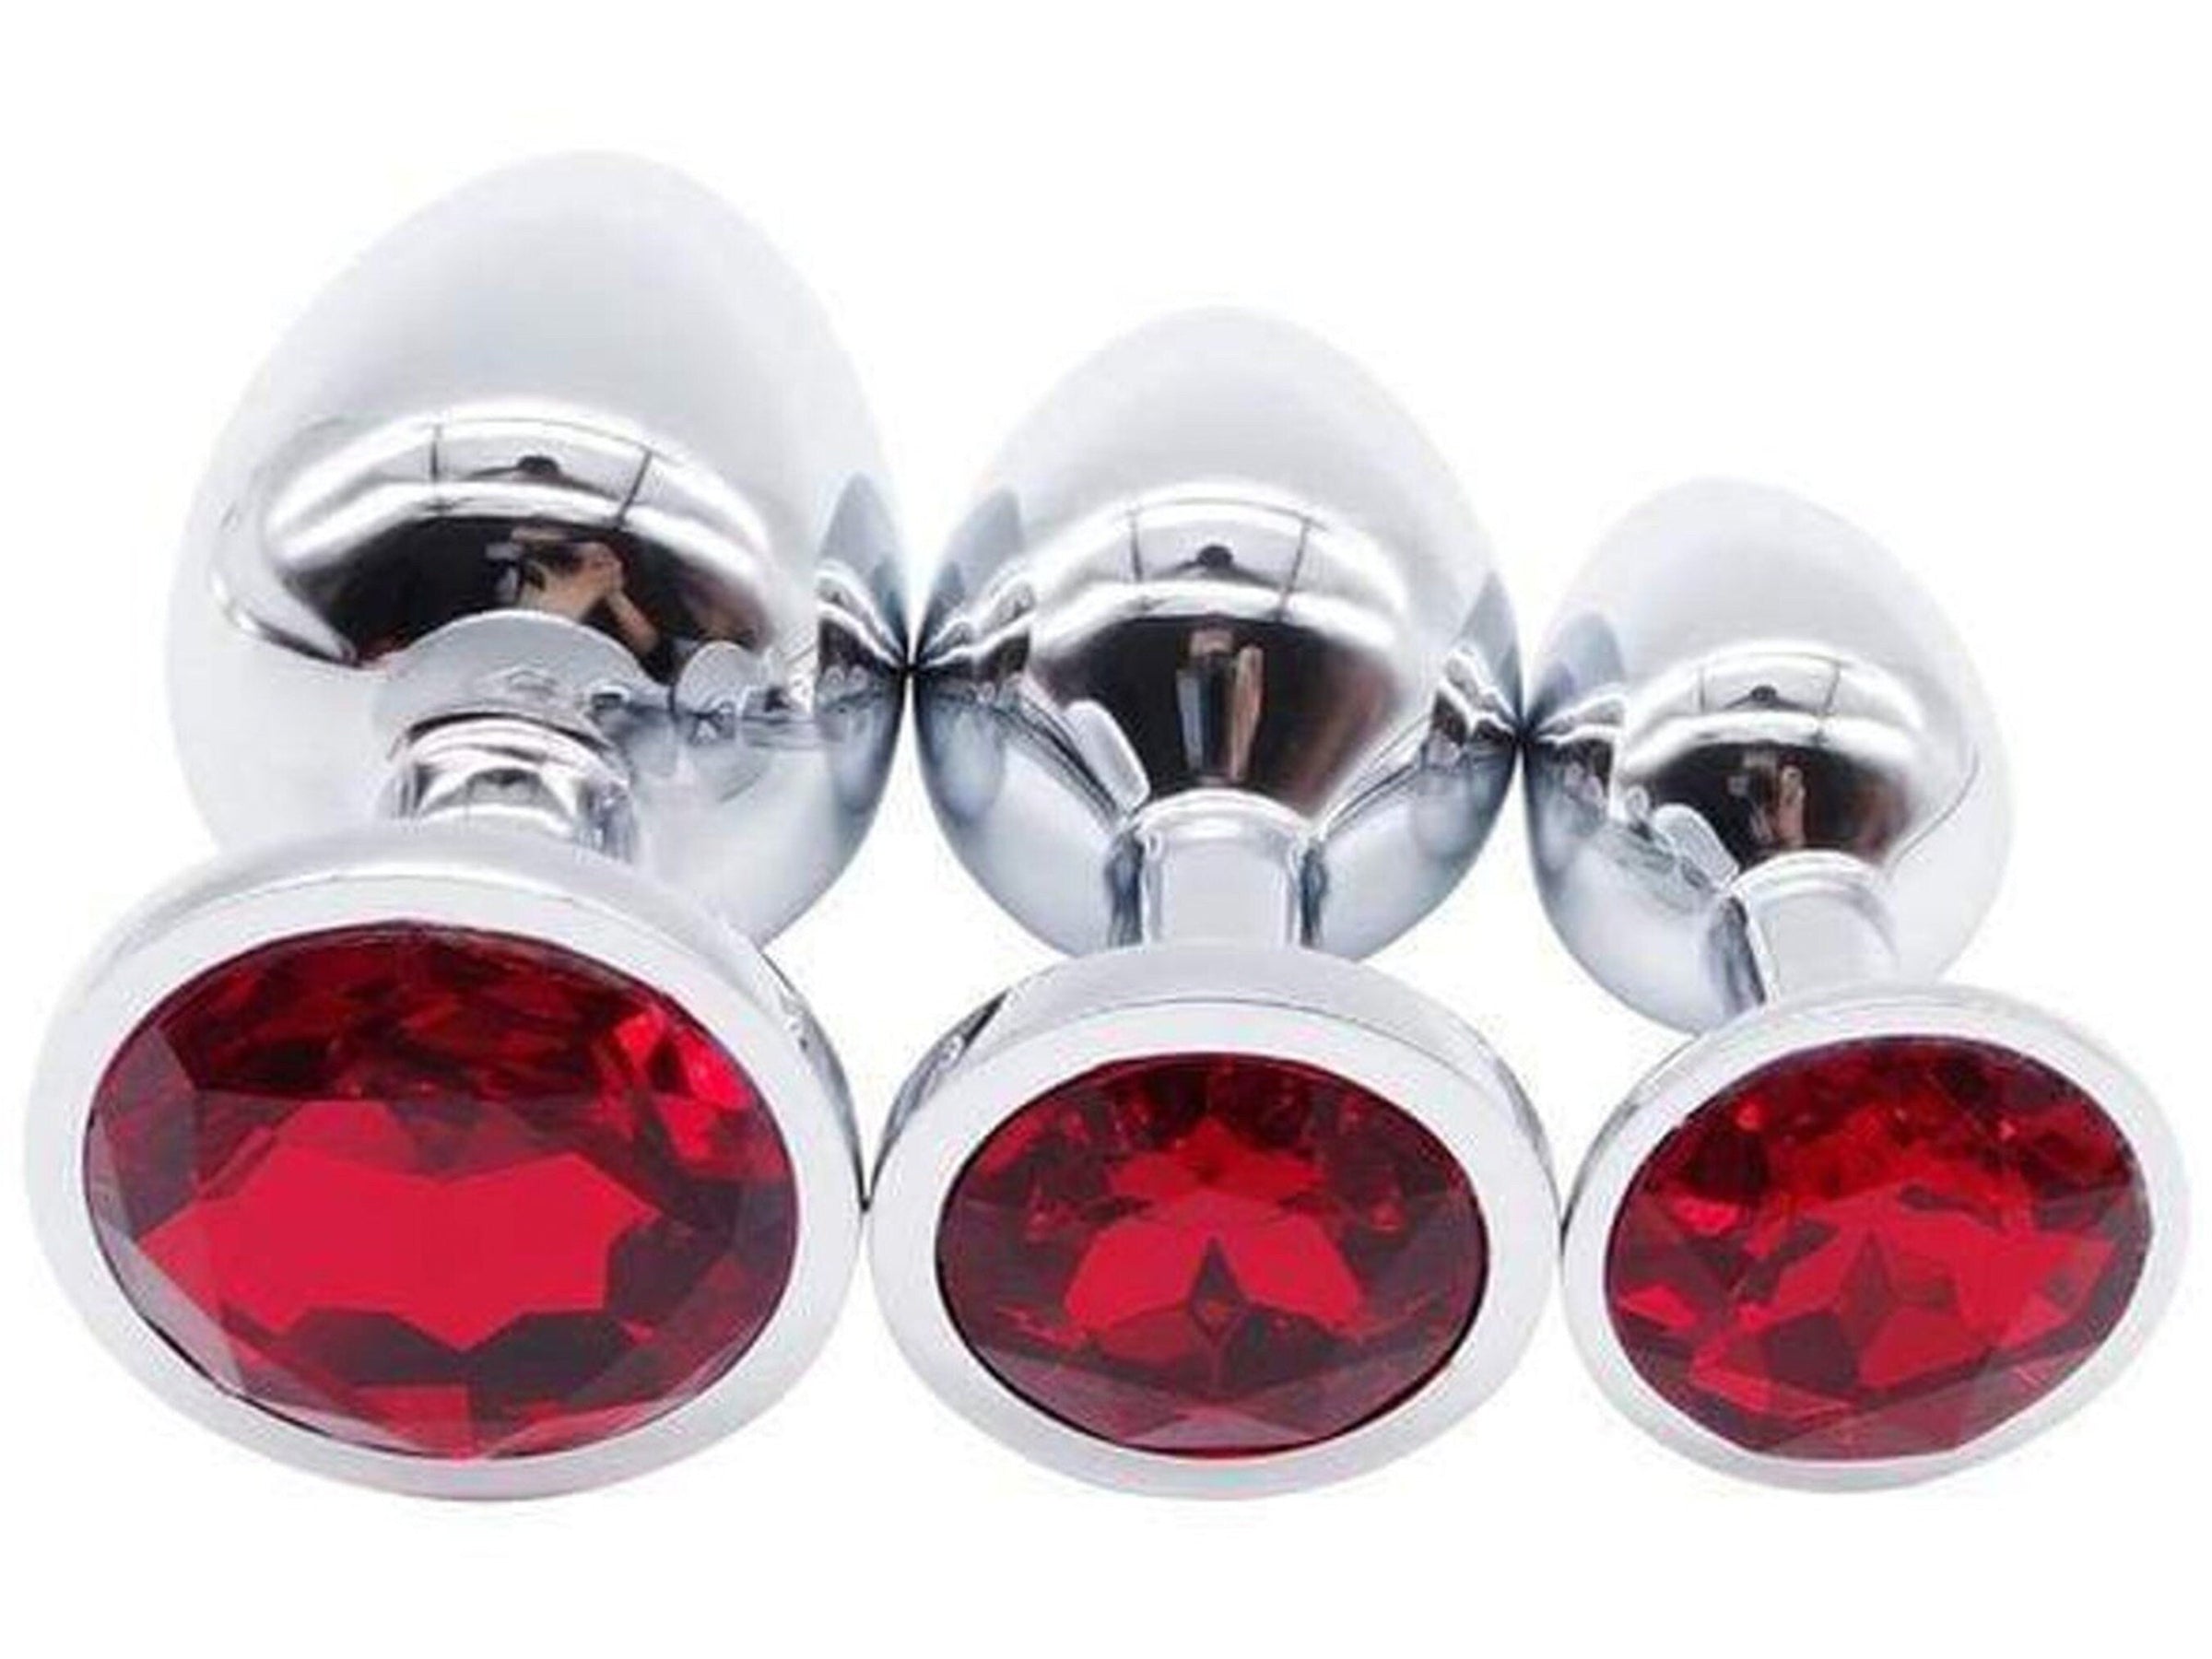 RED ROUND Acrylic Crystal Butt plug in 3 sizes anal toy sex jeweled as